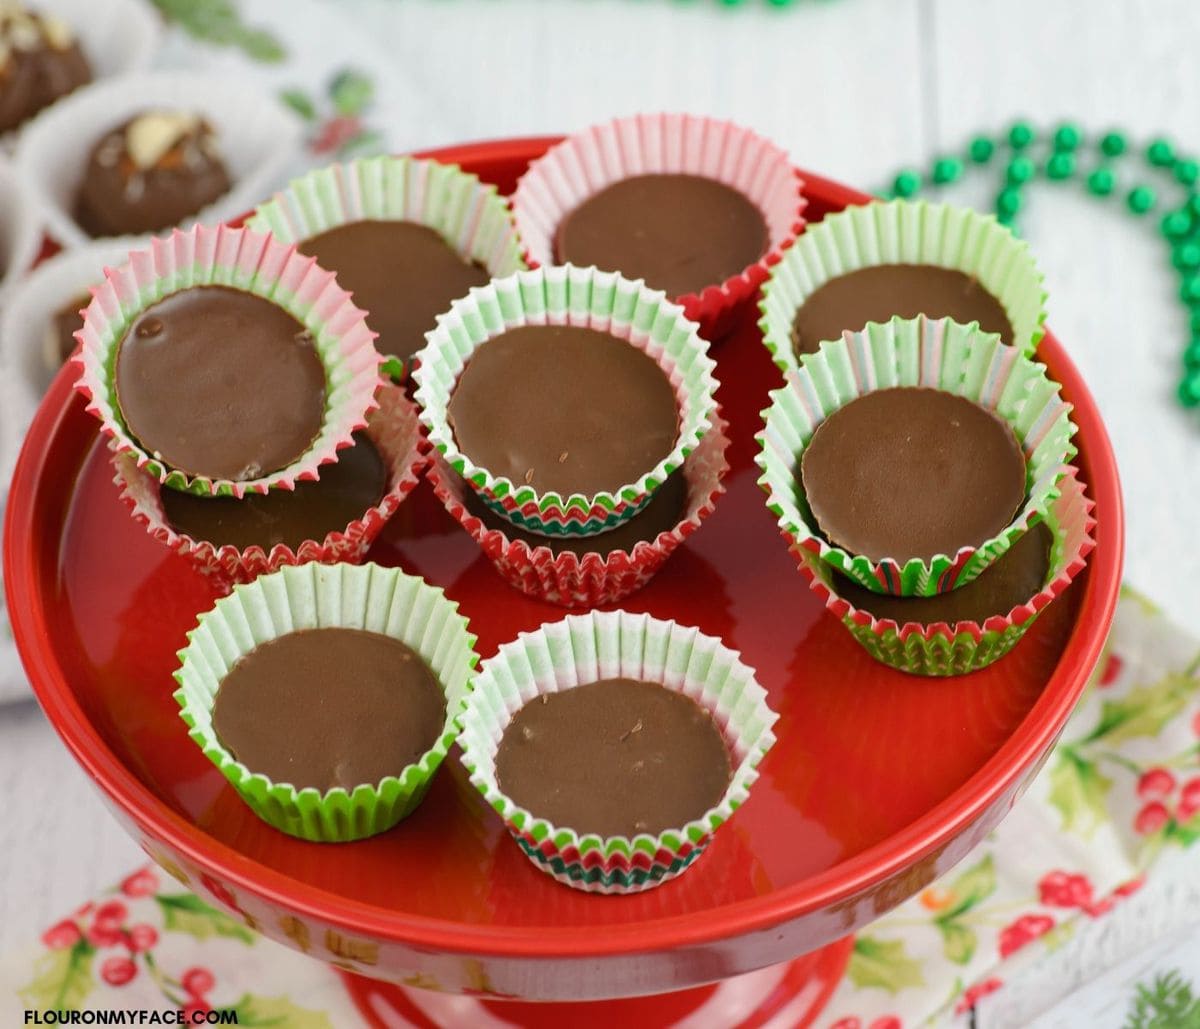 Copycat Mounds Candy Bites in color paper mini cups on a red cake stand.